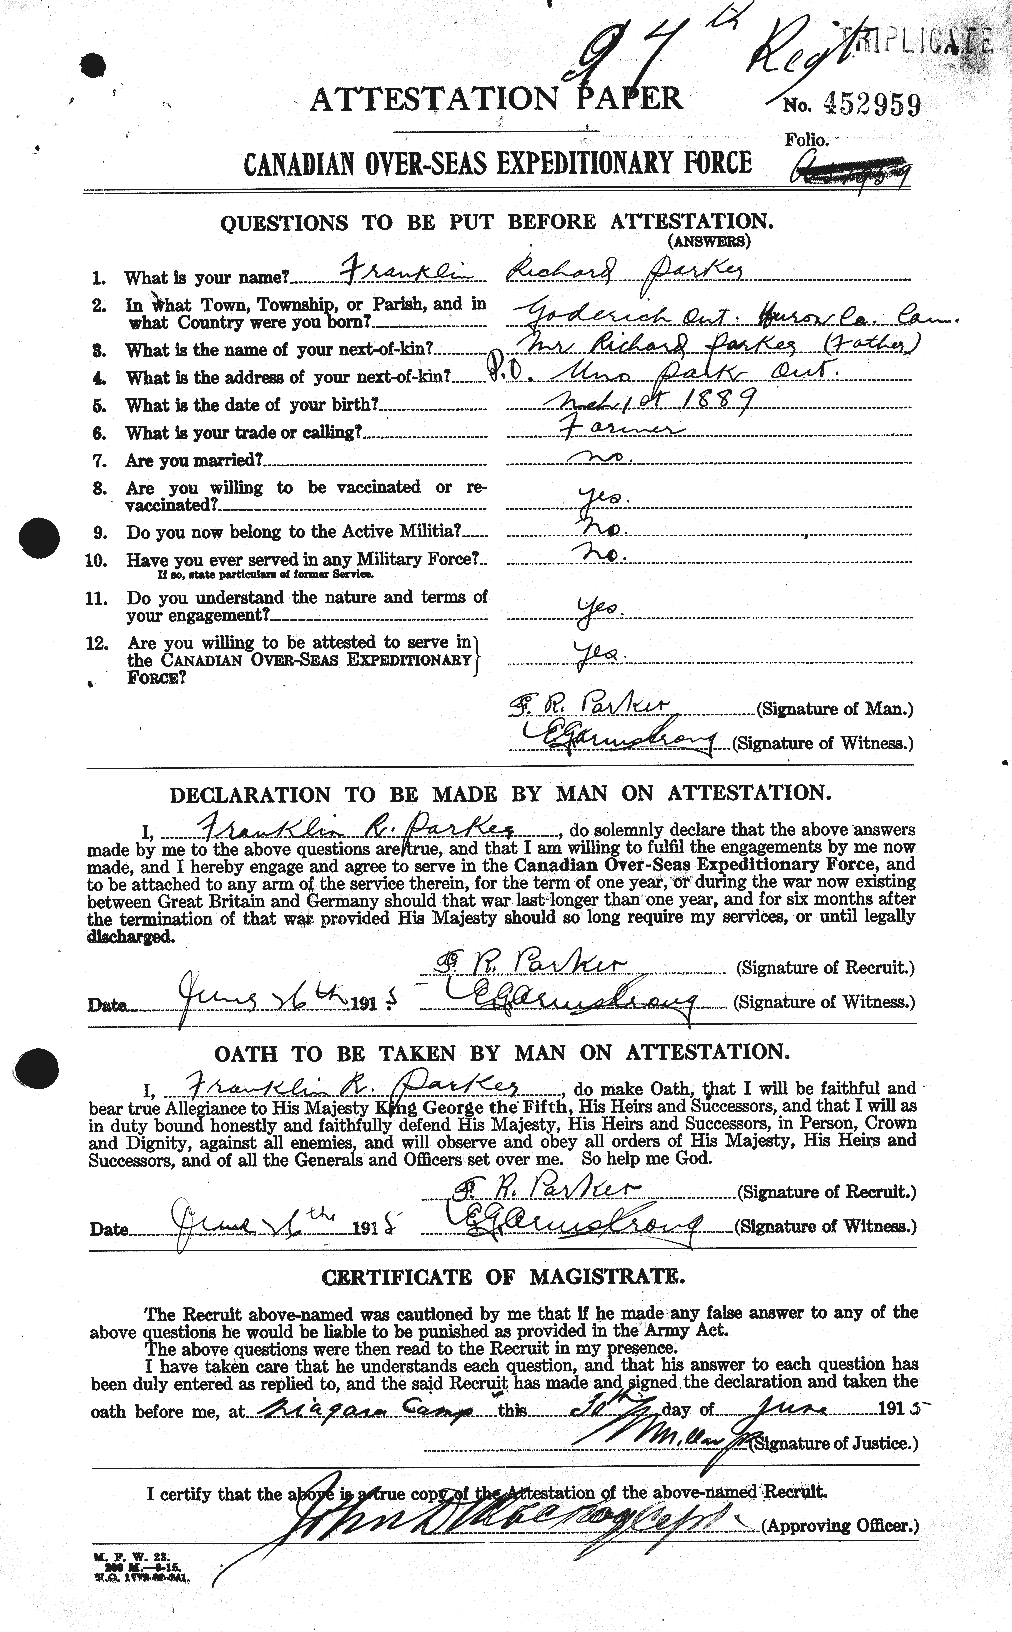 Personnel Records of the First World War - CEF 565199a